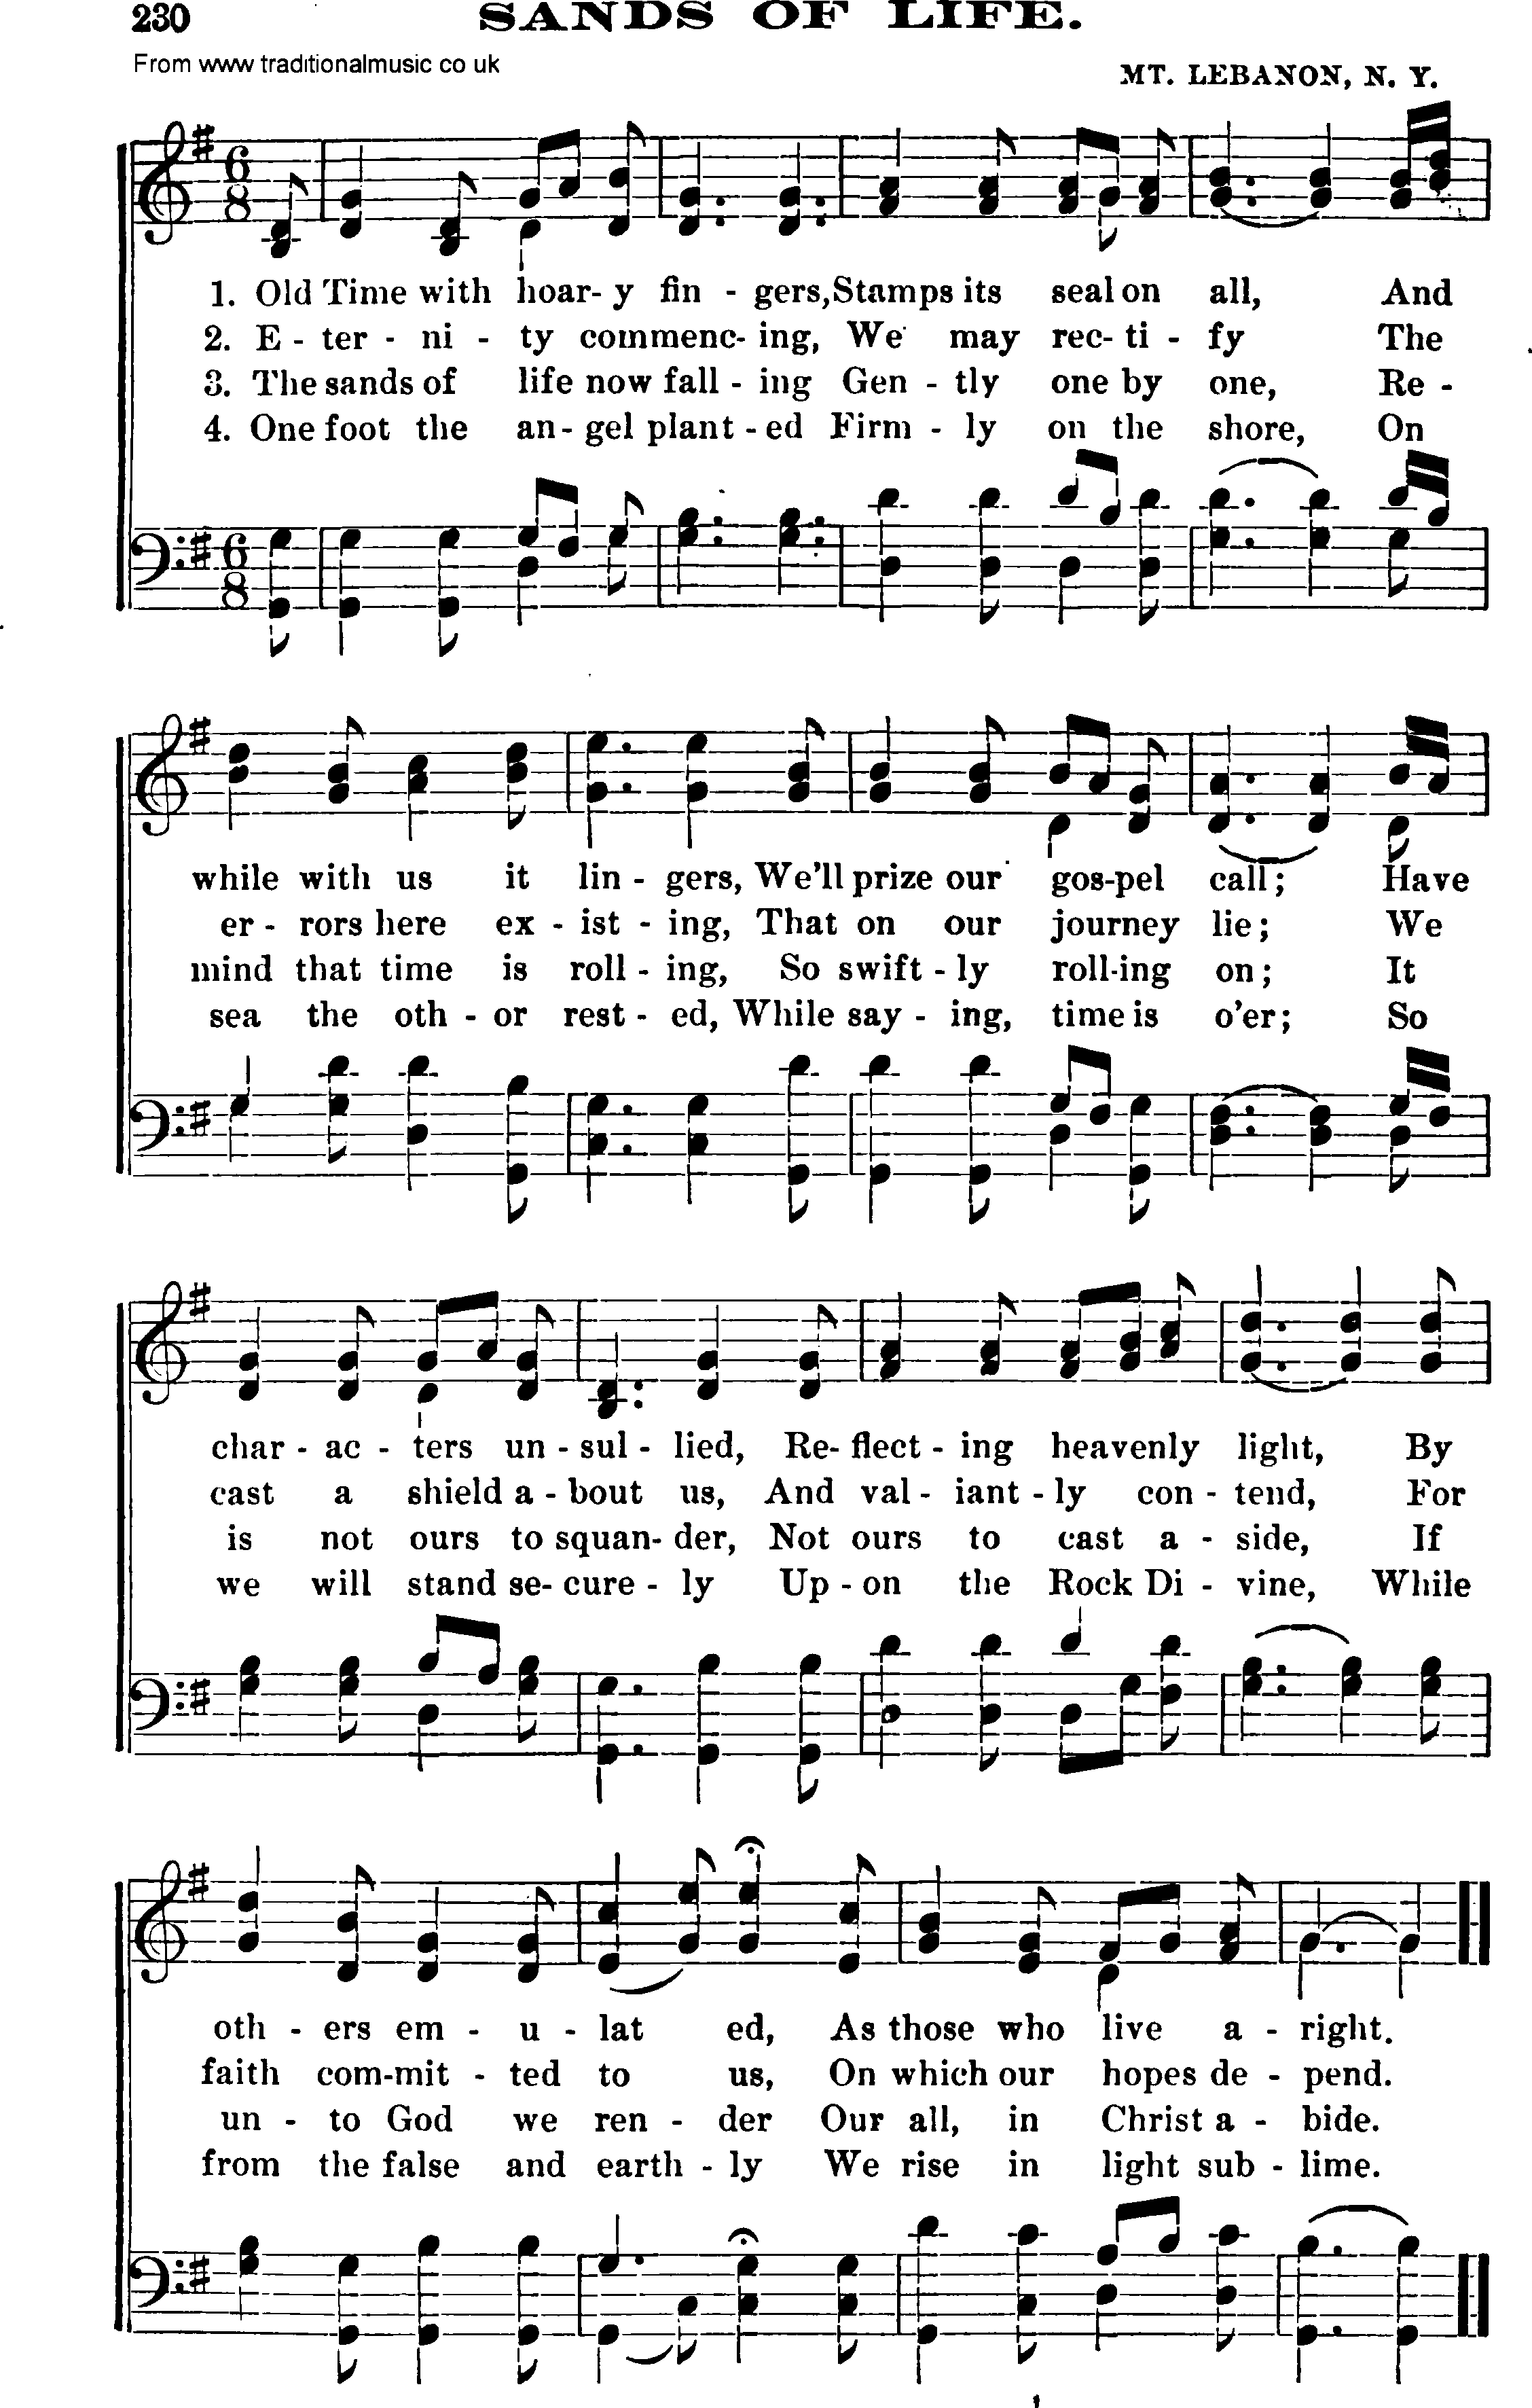 Shaker Music collection, Hymn: Sands Of Life, sheetmusic and PDF